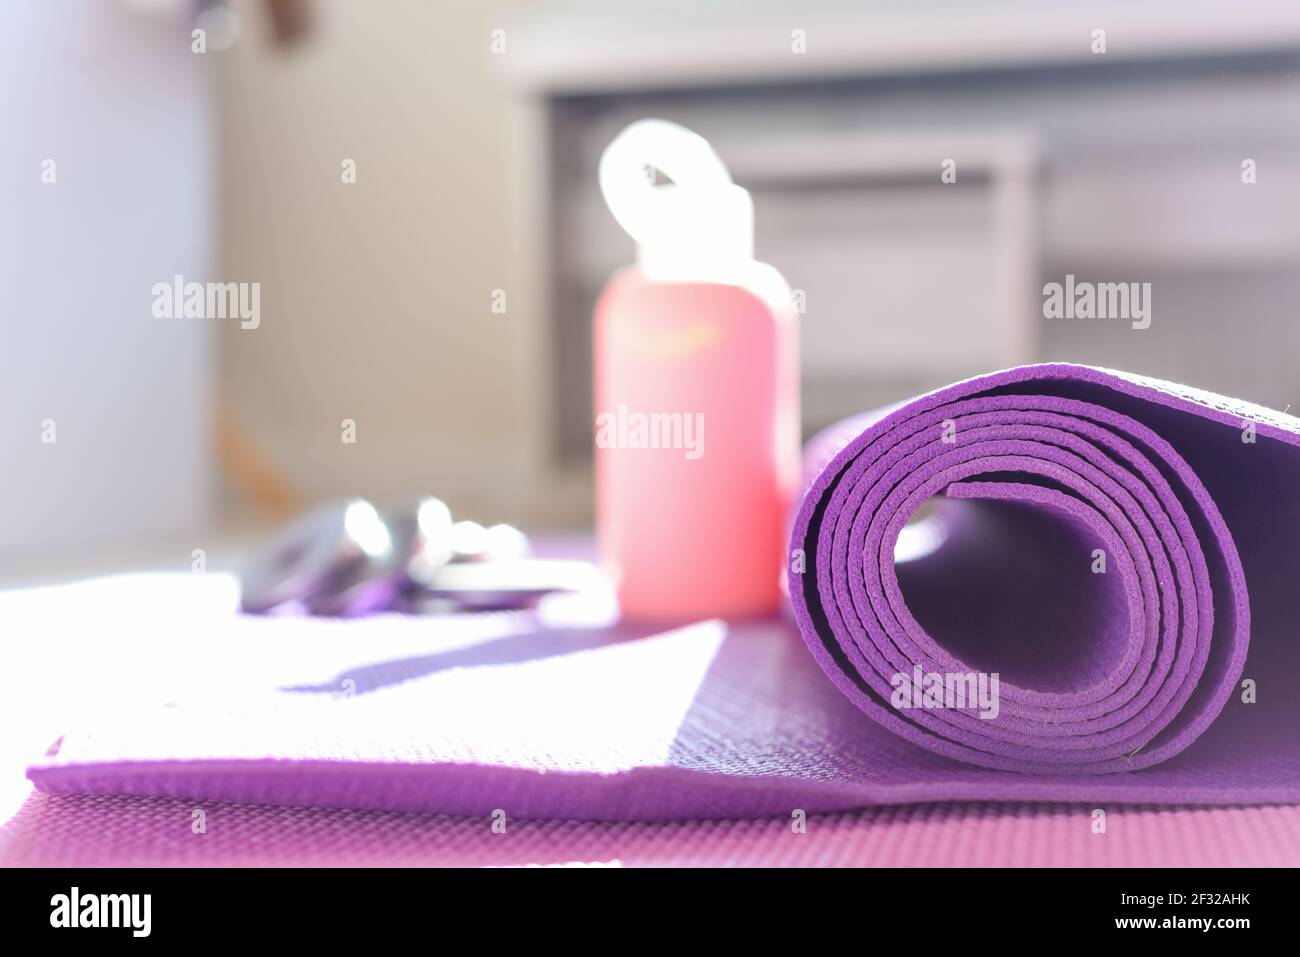 https://c8.alamy.com/comp/2F32AHK/yoga-mat-and-gym-equipment-for-healthy-lifestyle-and-fitness-background-2F32AHK.jpg